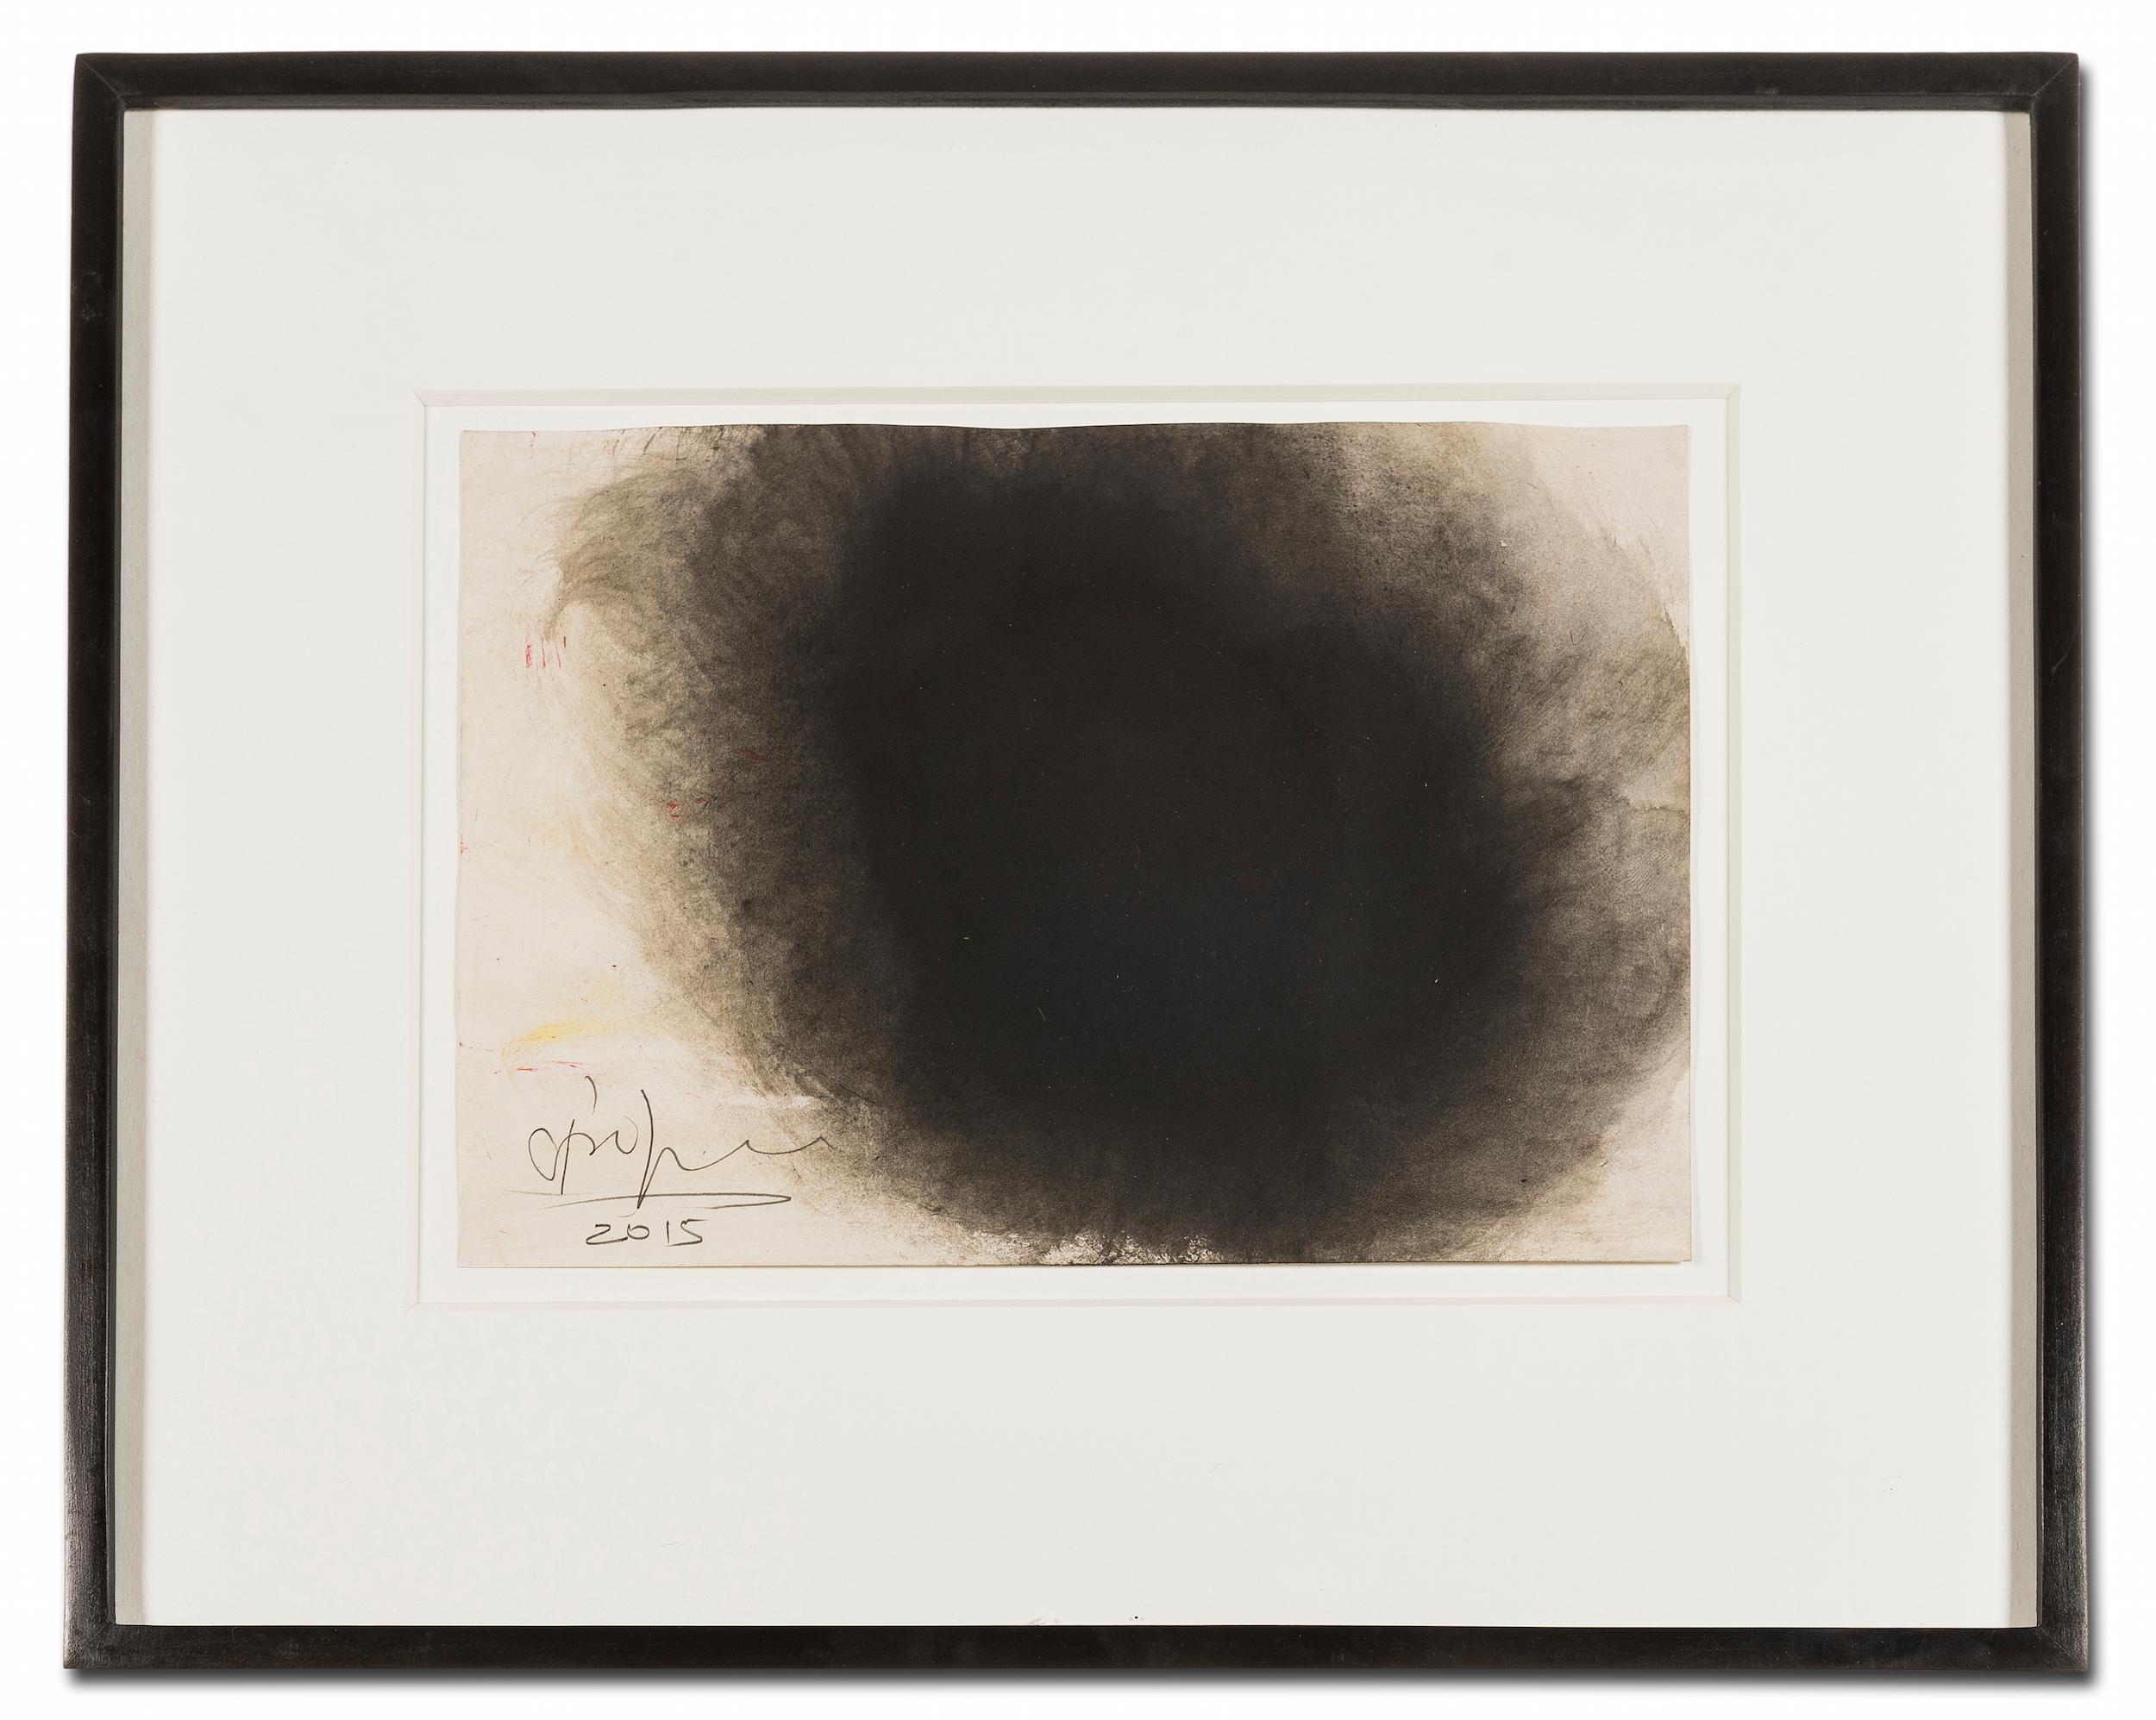 ANISH KAPOOR
Untitled, 2015
Ink and gouache on paper 
Signed and dated in pencil
Sheet: 21.0 x 29.5 cm (8.3 x 11.6 in)

Provenance
Private Collection, UK.
The Drawing Room, London, UK.